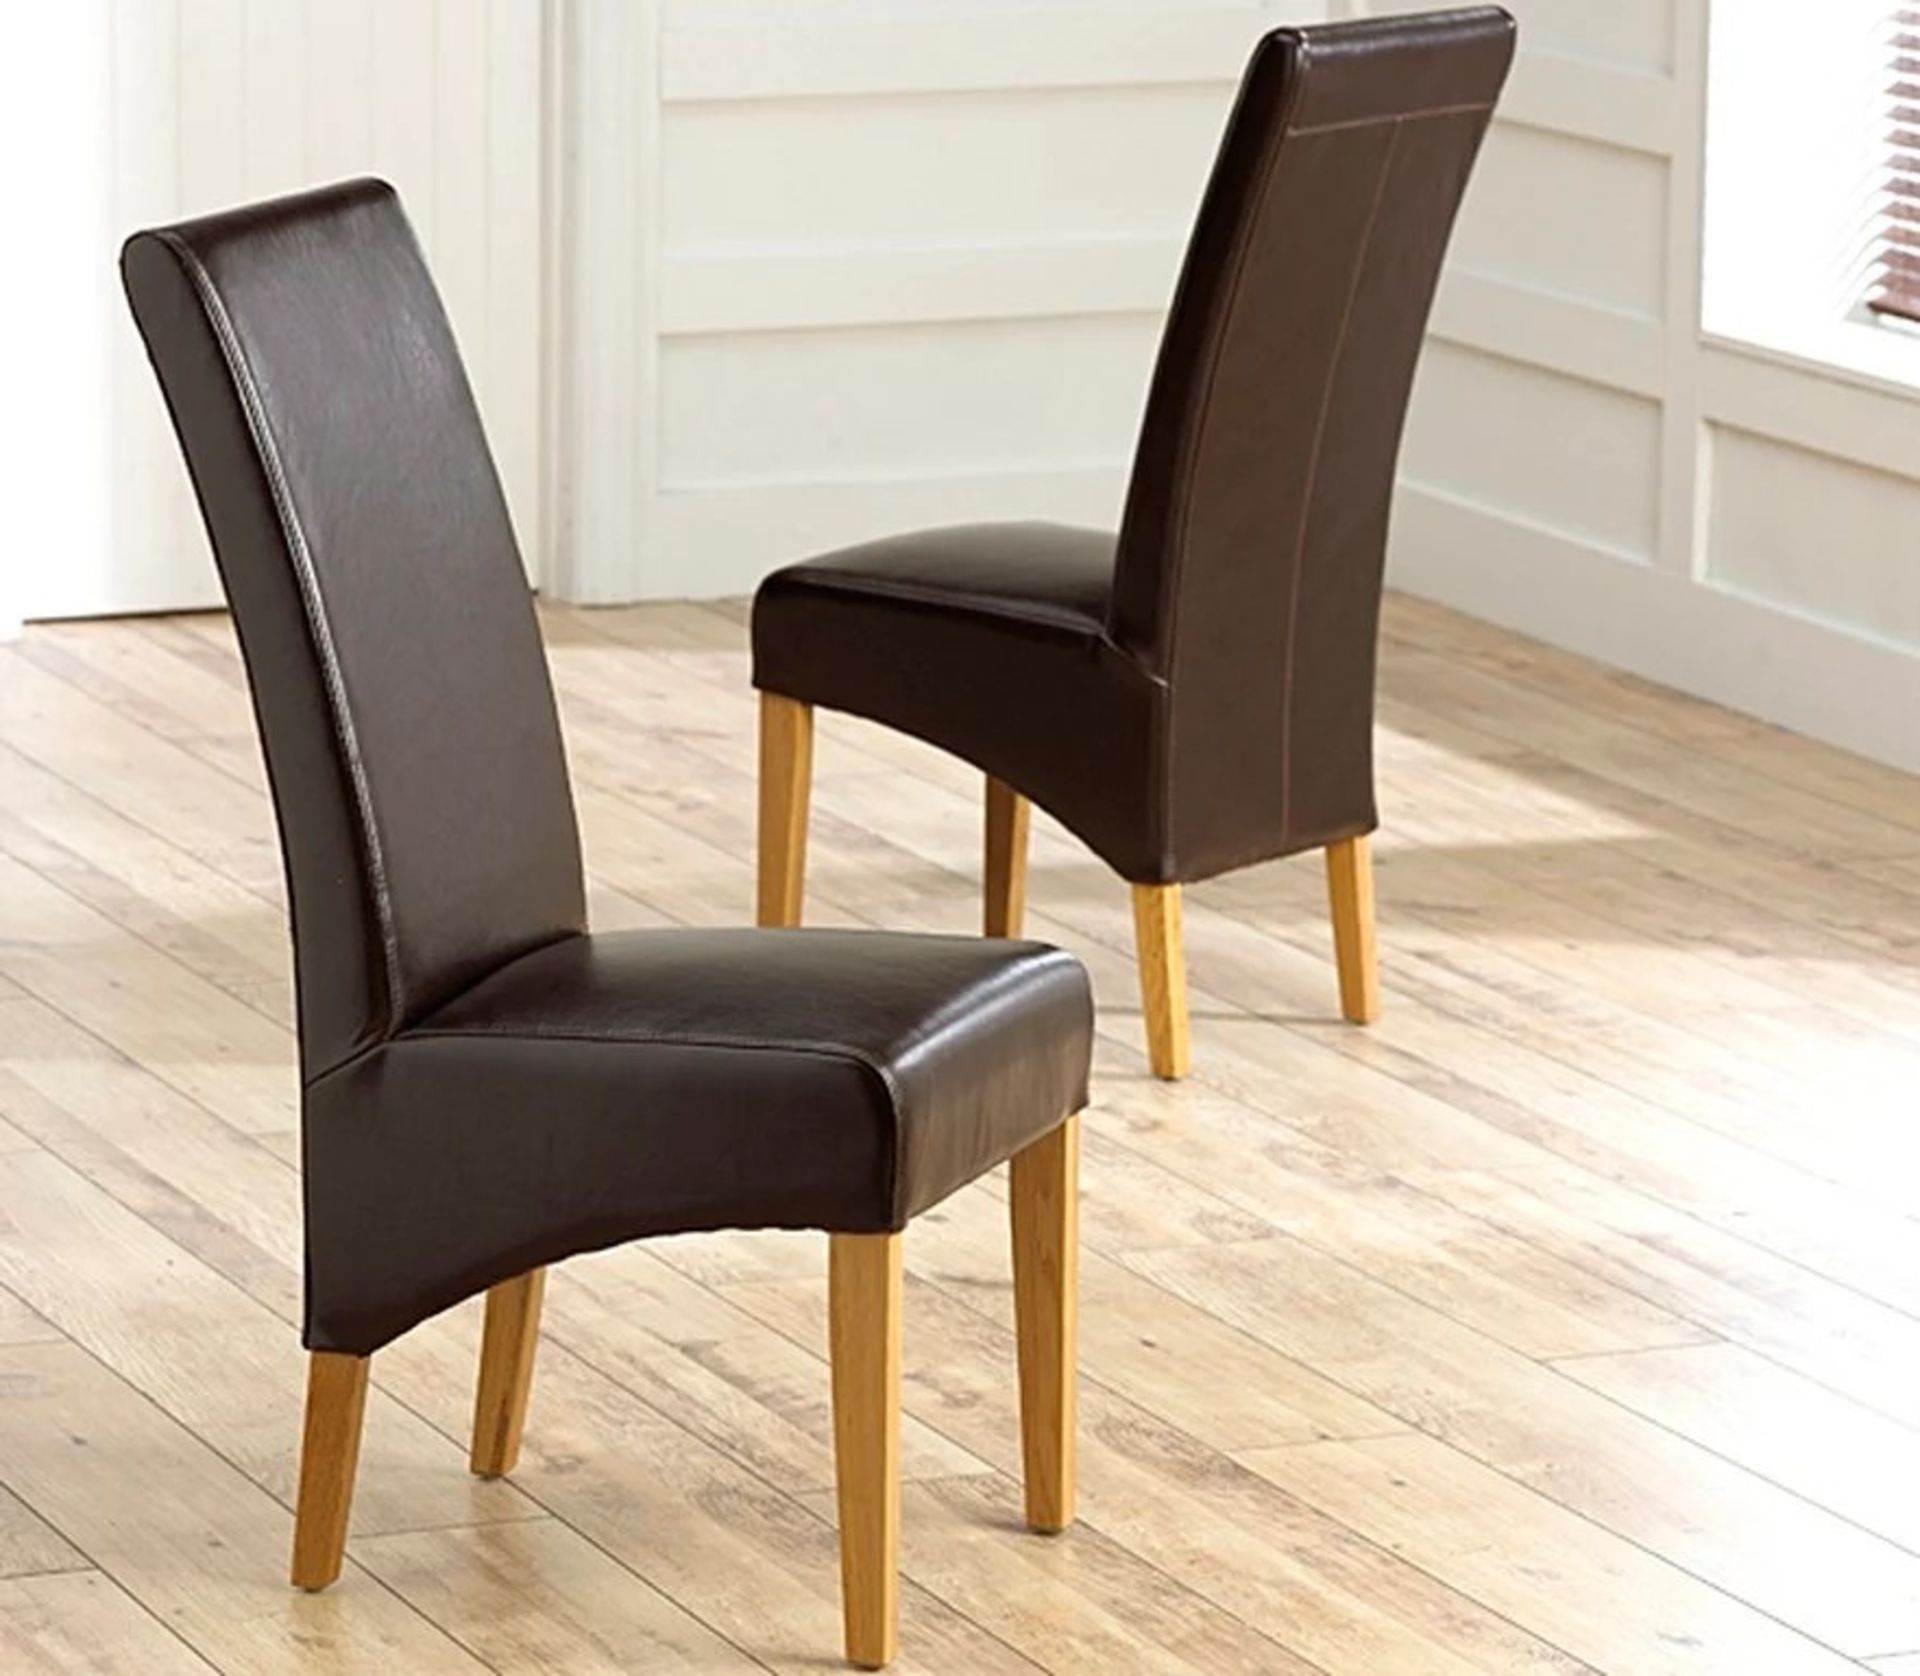 A set of 4 x Cannes Brown Bonded Leather Dining Chair Comfortable and practical faux leather seating